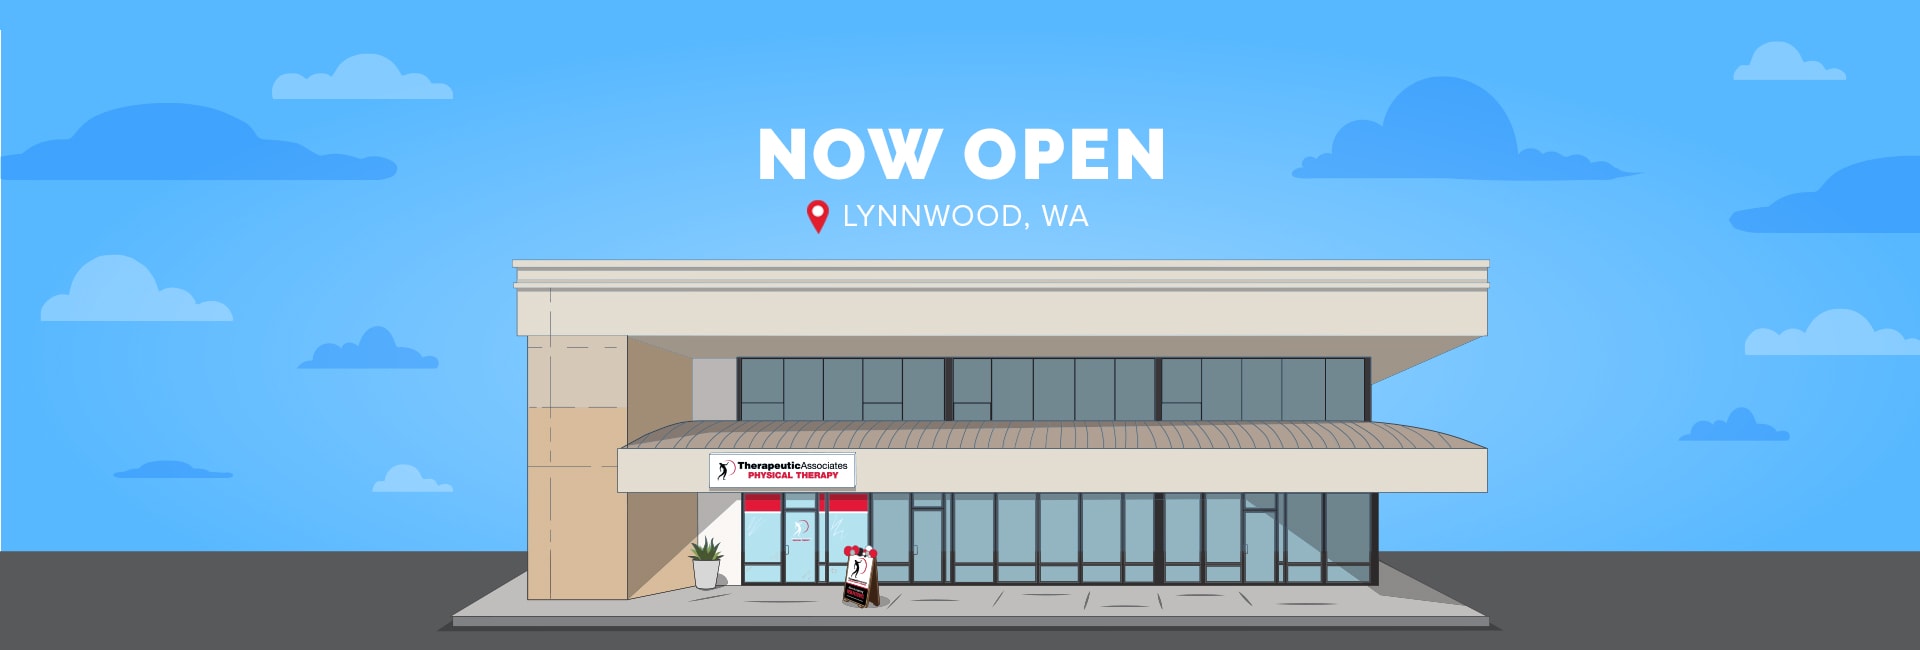 Therapeutic Associates Physical Therapy - Lynnwood - Now Open and Accepting New Patients